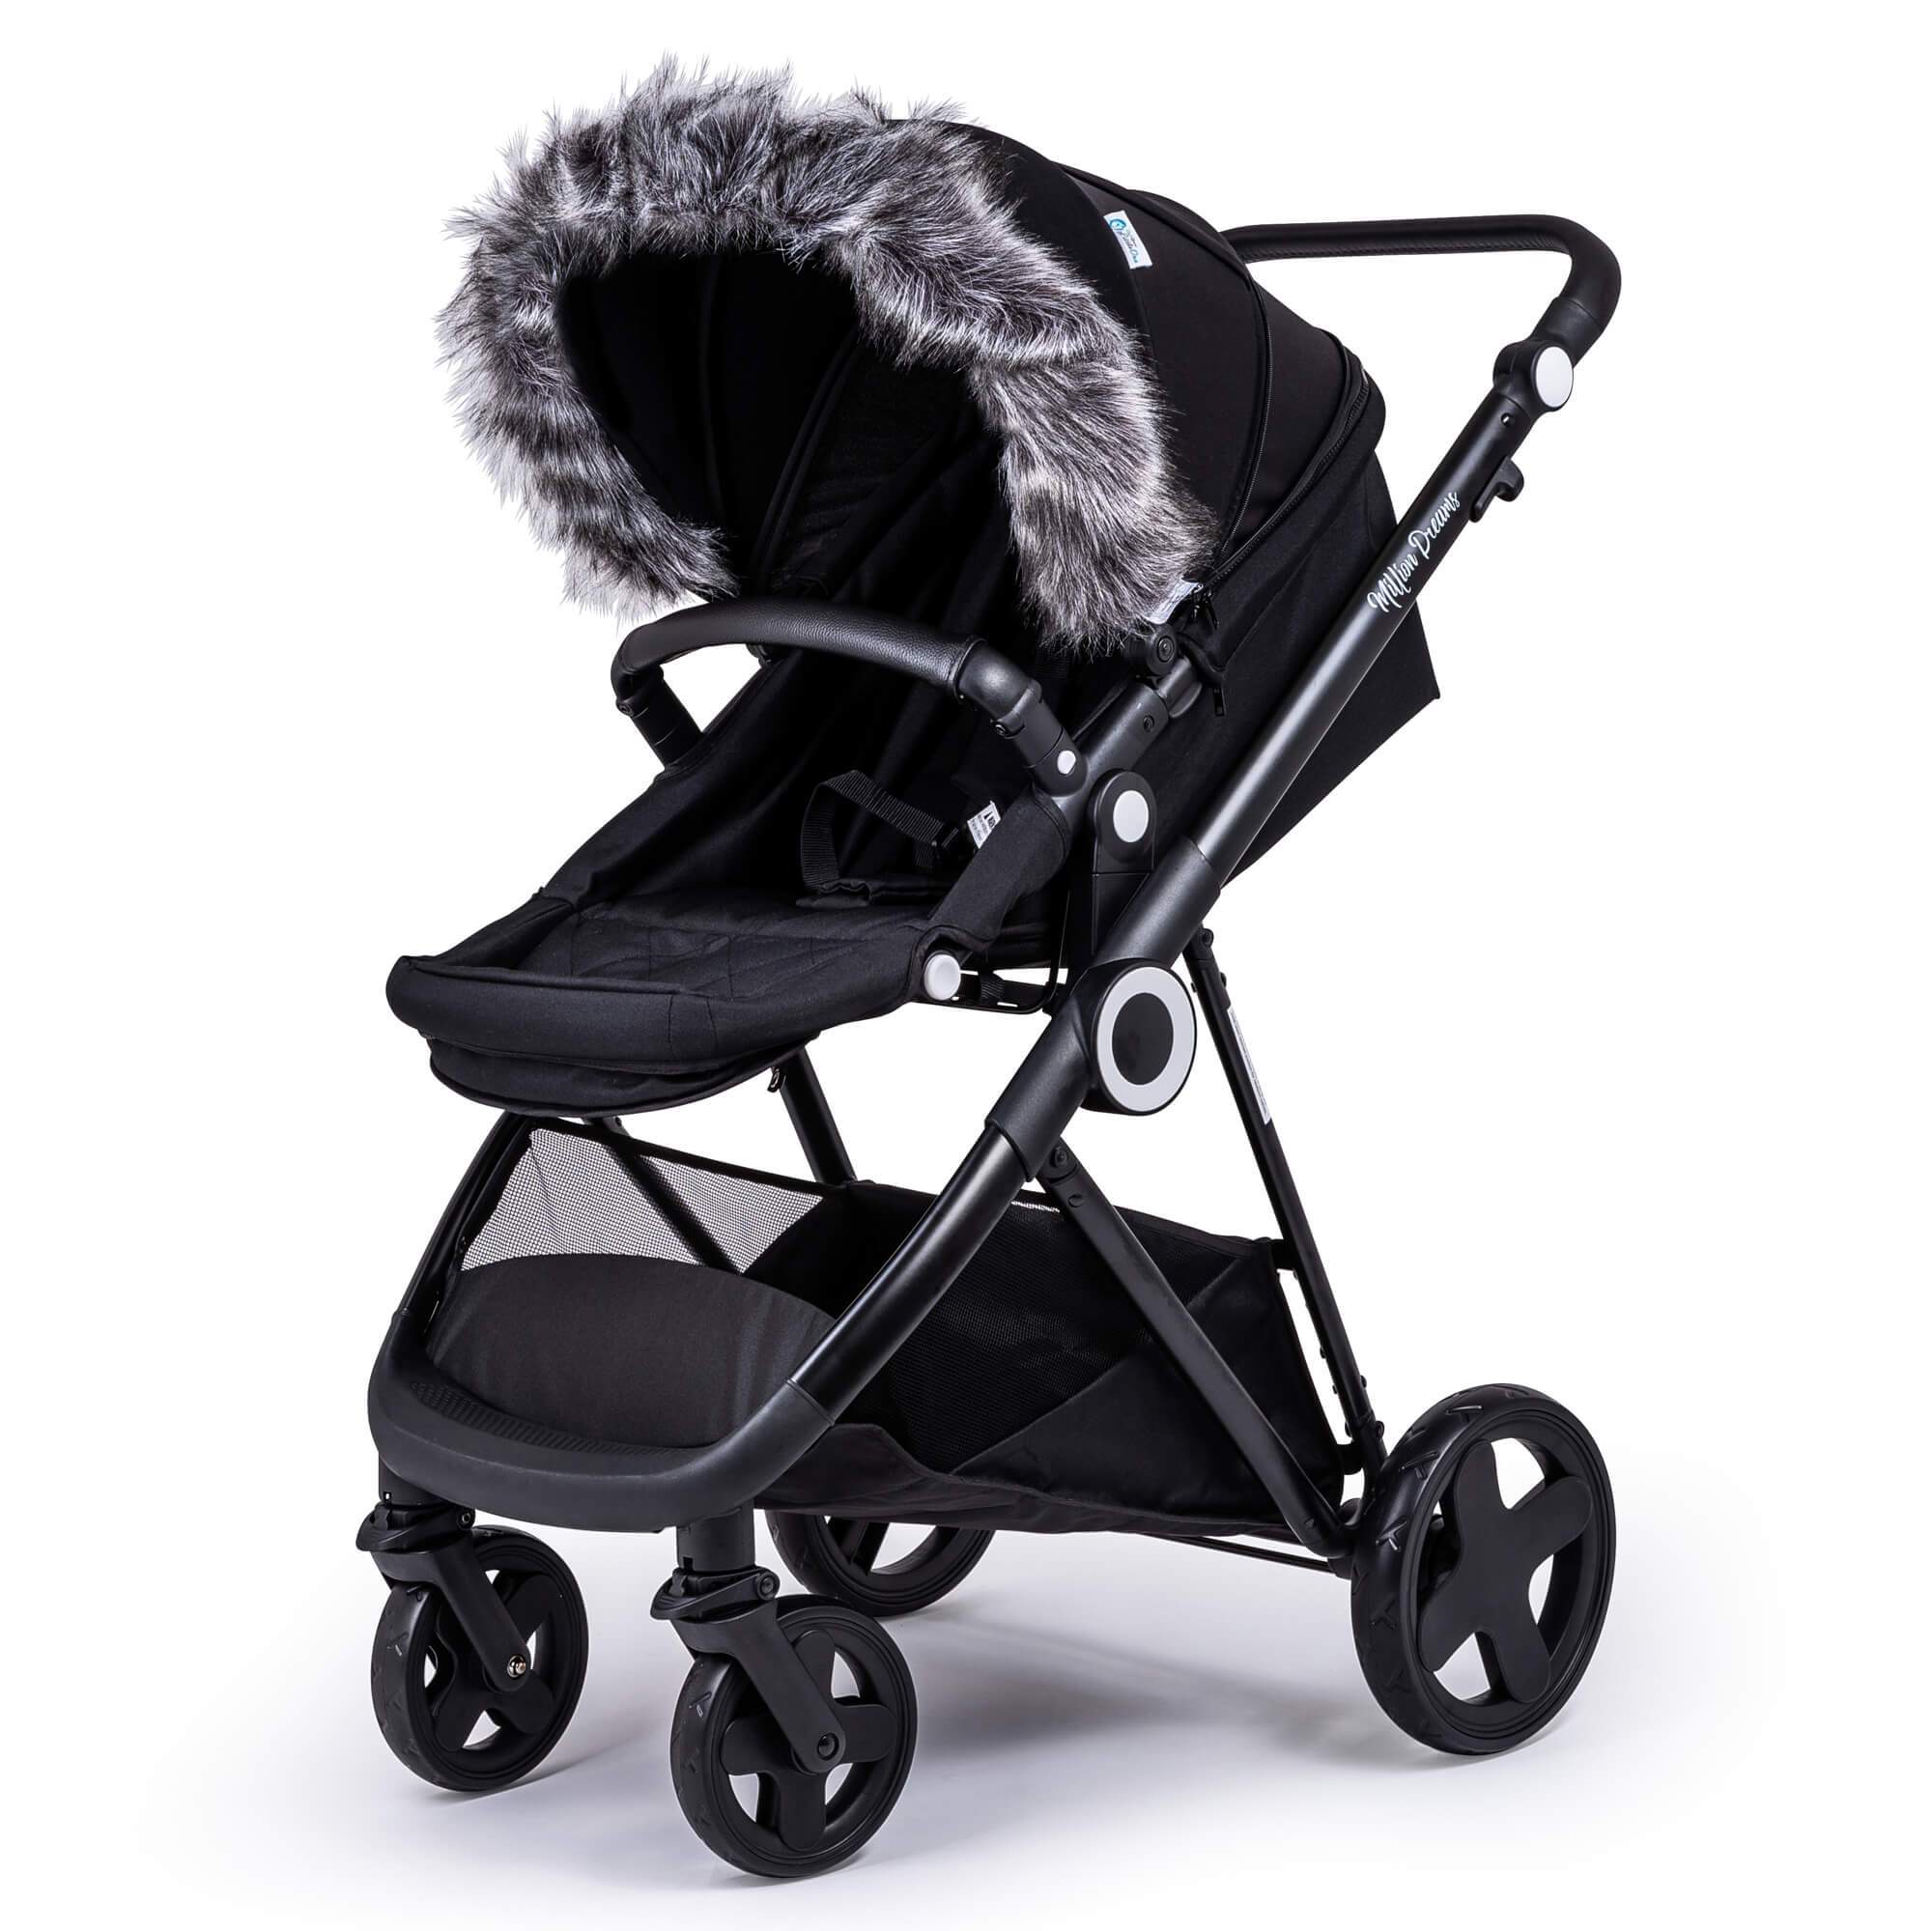 Pram Fur Hood Trim Attachment for Pushchair Compatible with Baby Jogger - Dark Grey / Fits All Models | For Your Little One